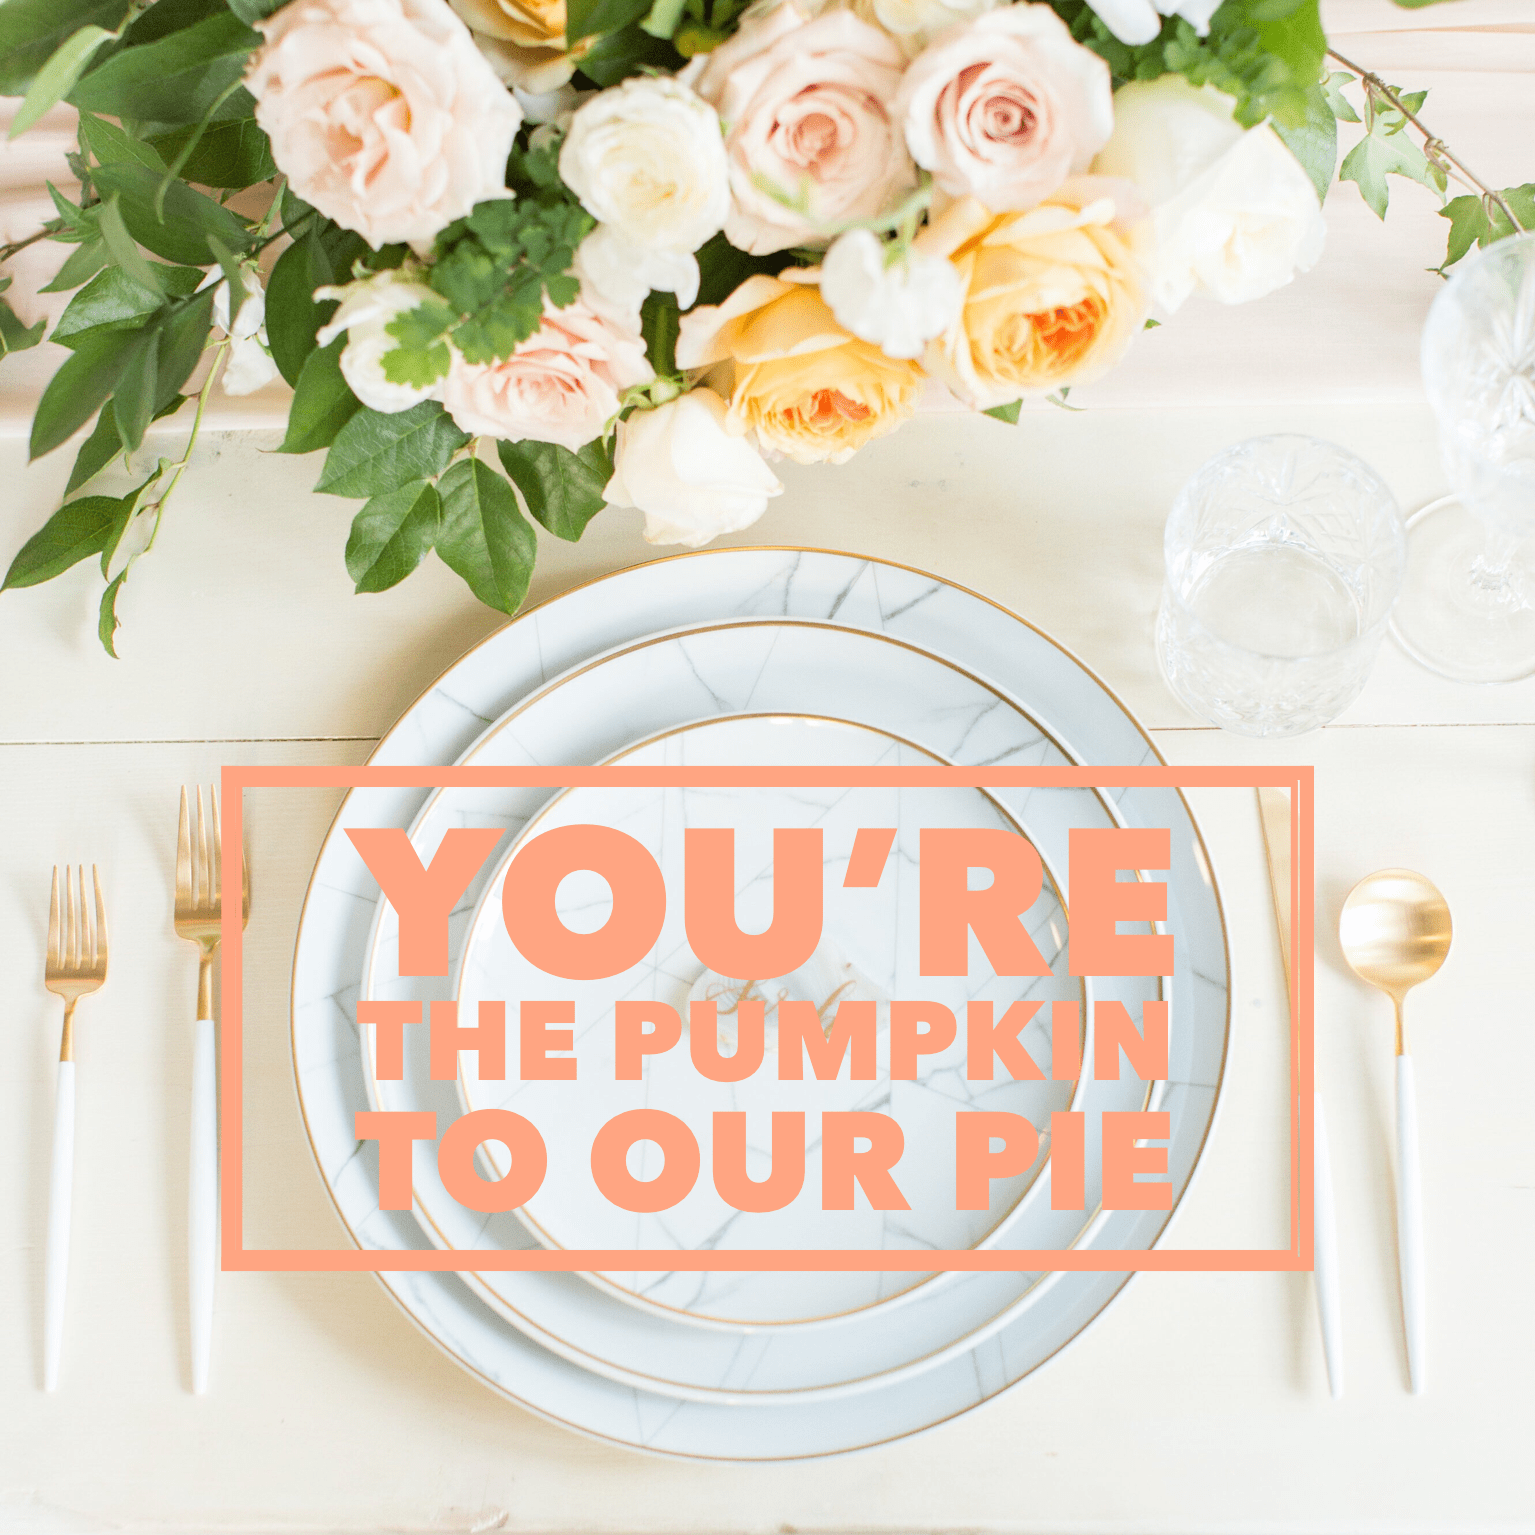 Black Friday Sale | Black Friday Deal | You're the pumpkin to our pie | You're the pumpkin to my pie | Thanksgiving Quote | Table Setting | Thanksgiving Table | Laura & Rachel Photography